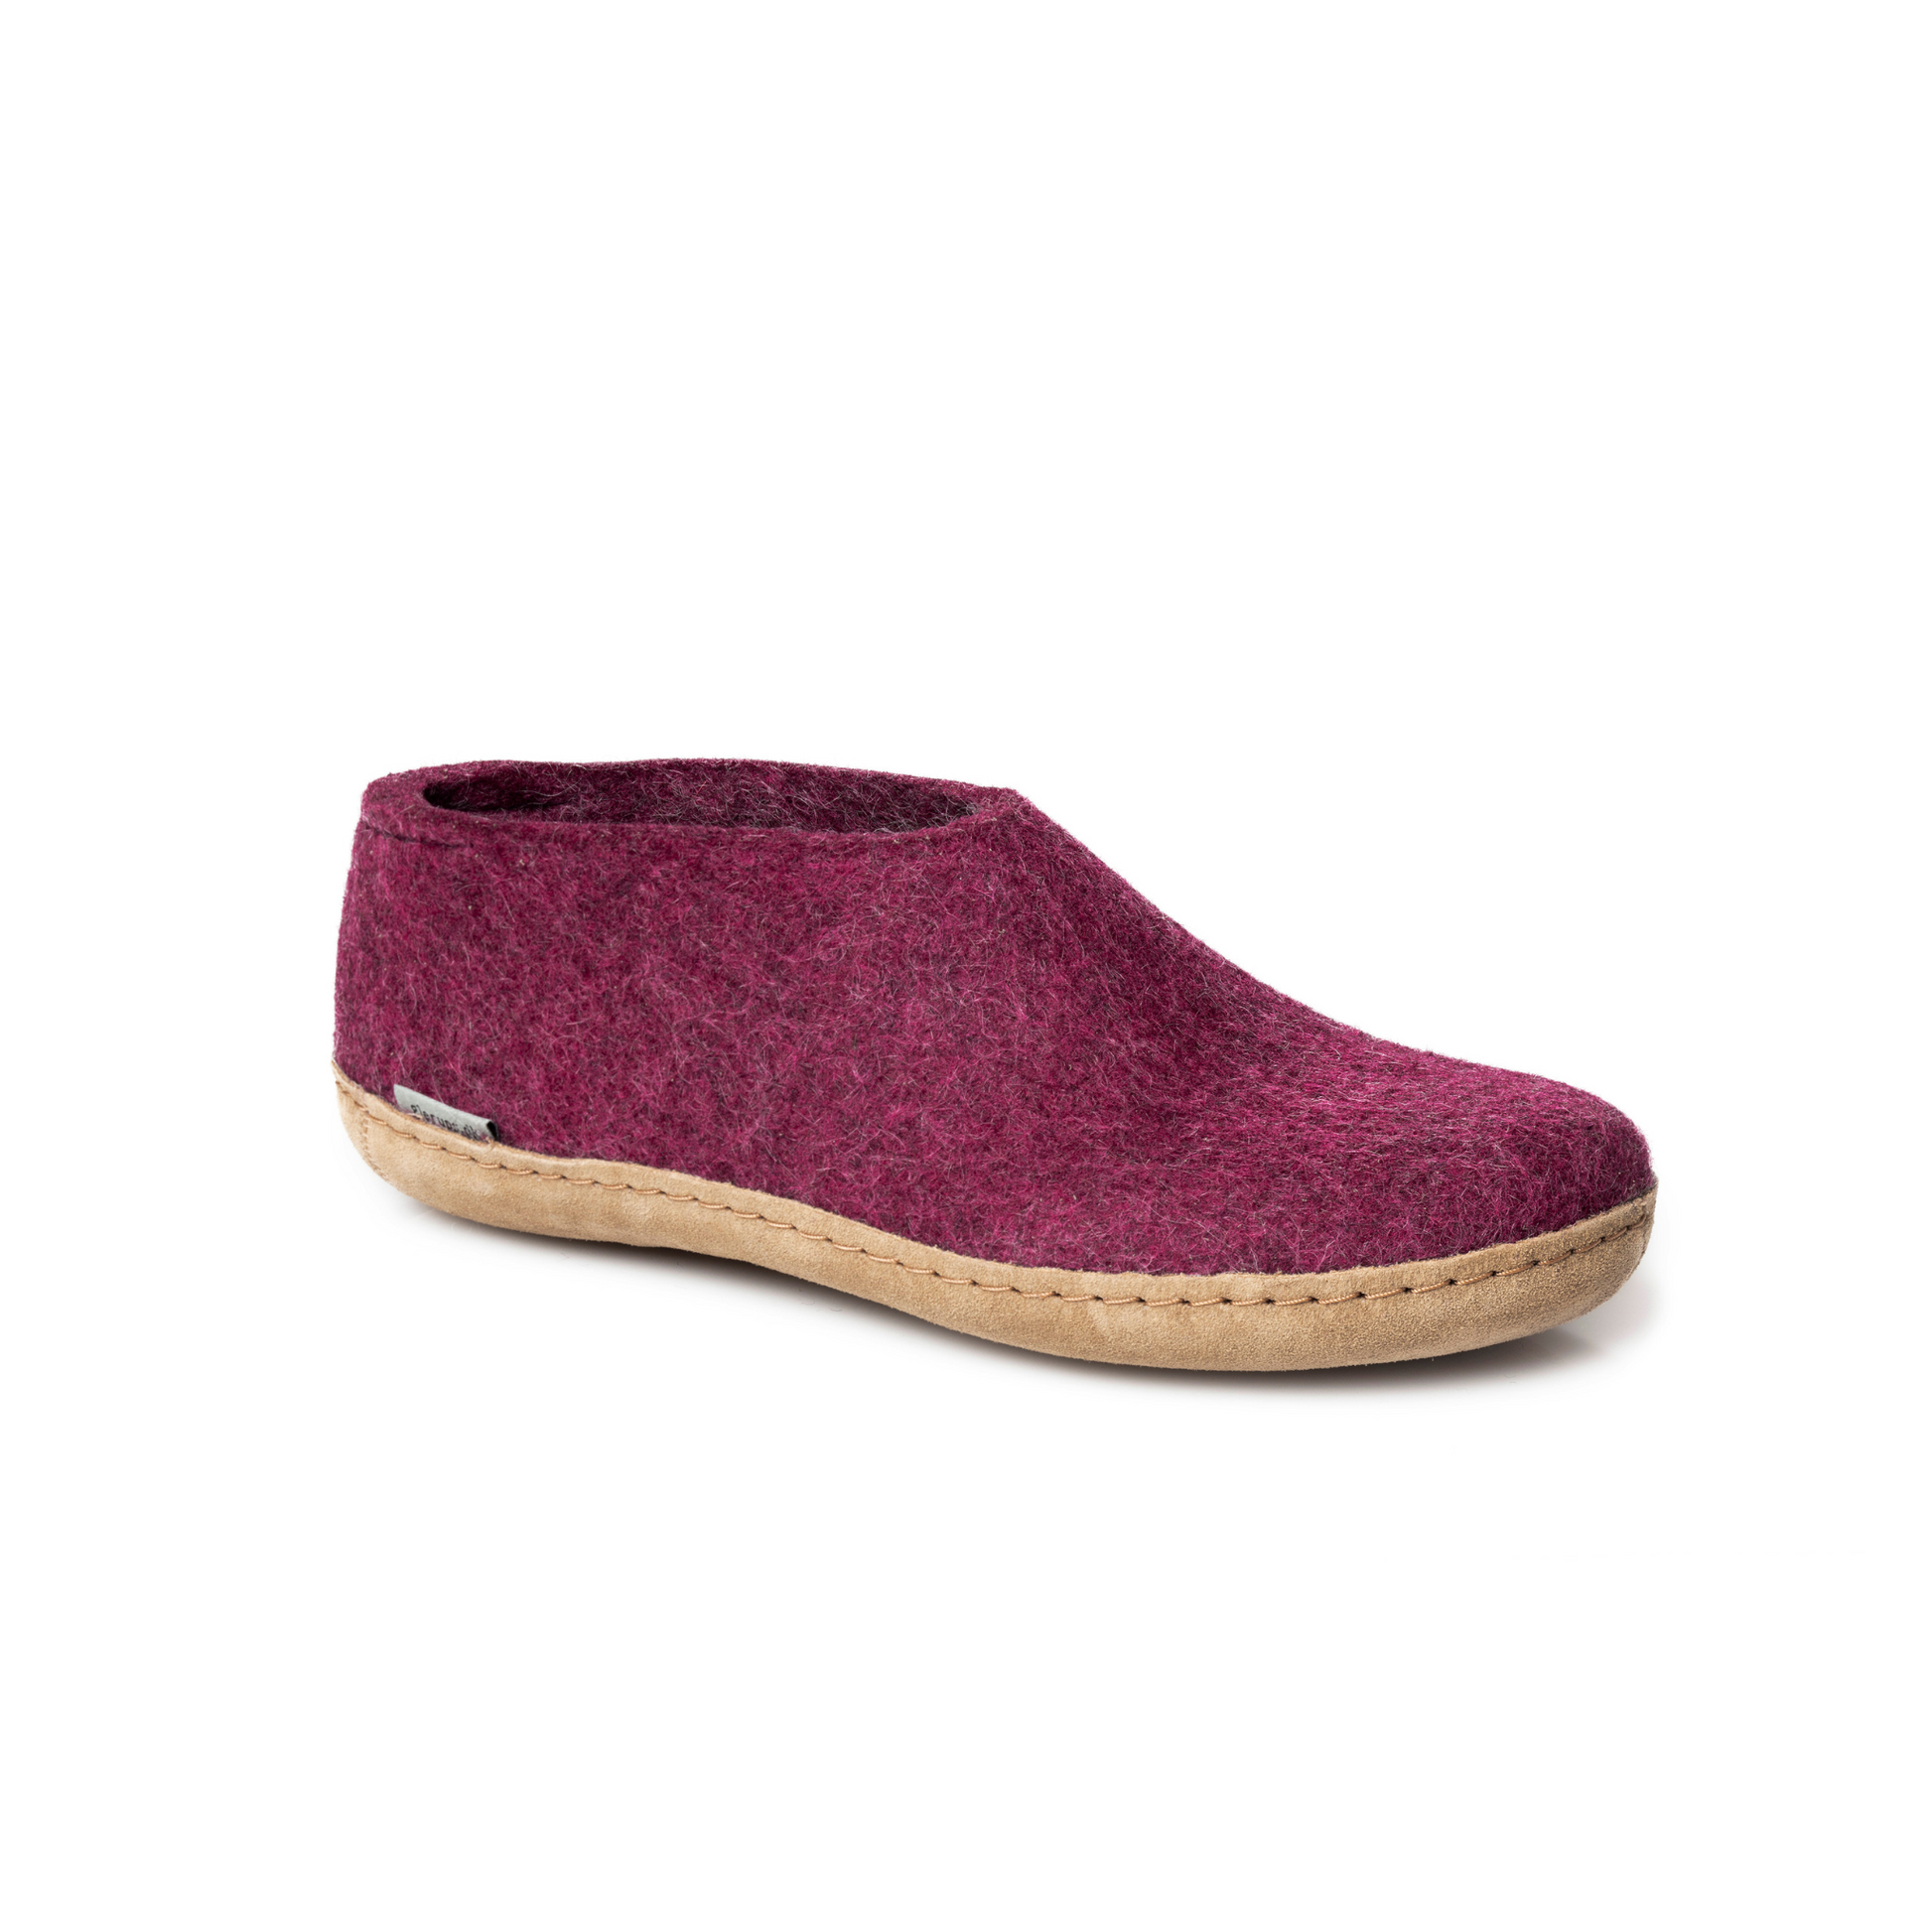 A felted dark-mauve tall-back slipper pictured at a slight angle, showing part of the top front and side of the slipper. A tan leather sole lines the bottom of the shoe with a row of stitching.